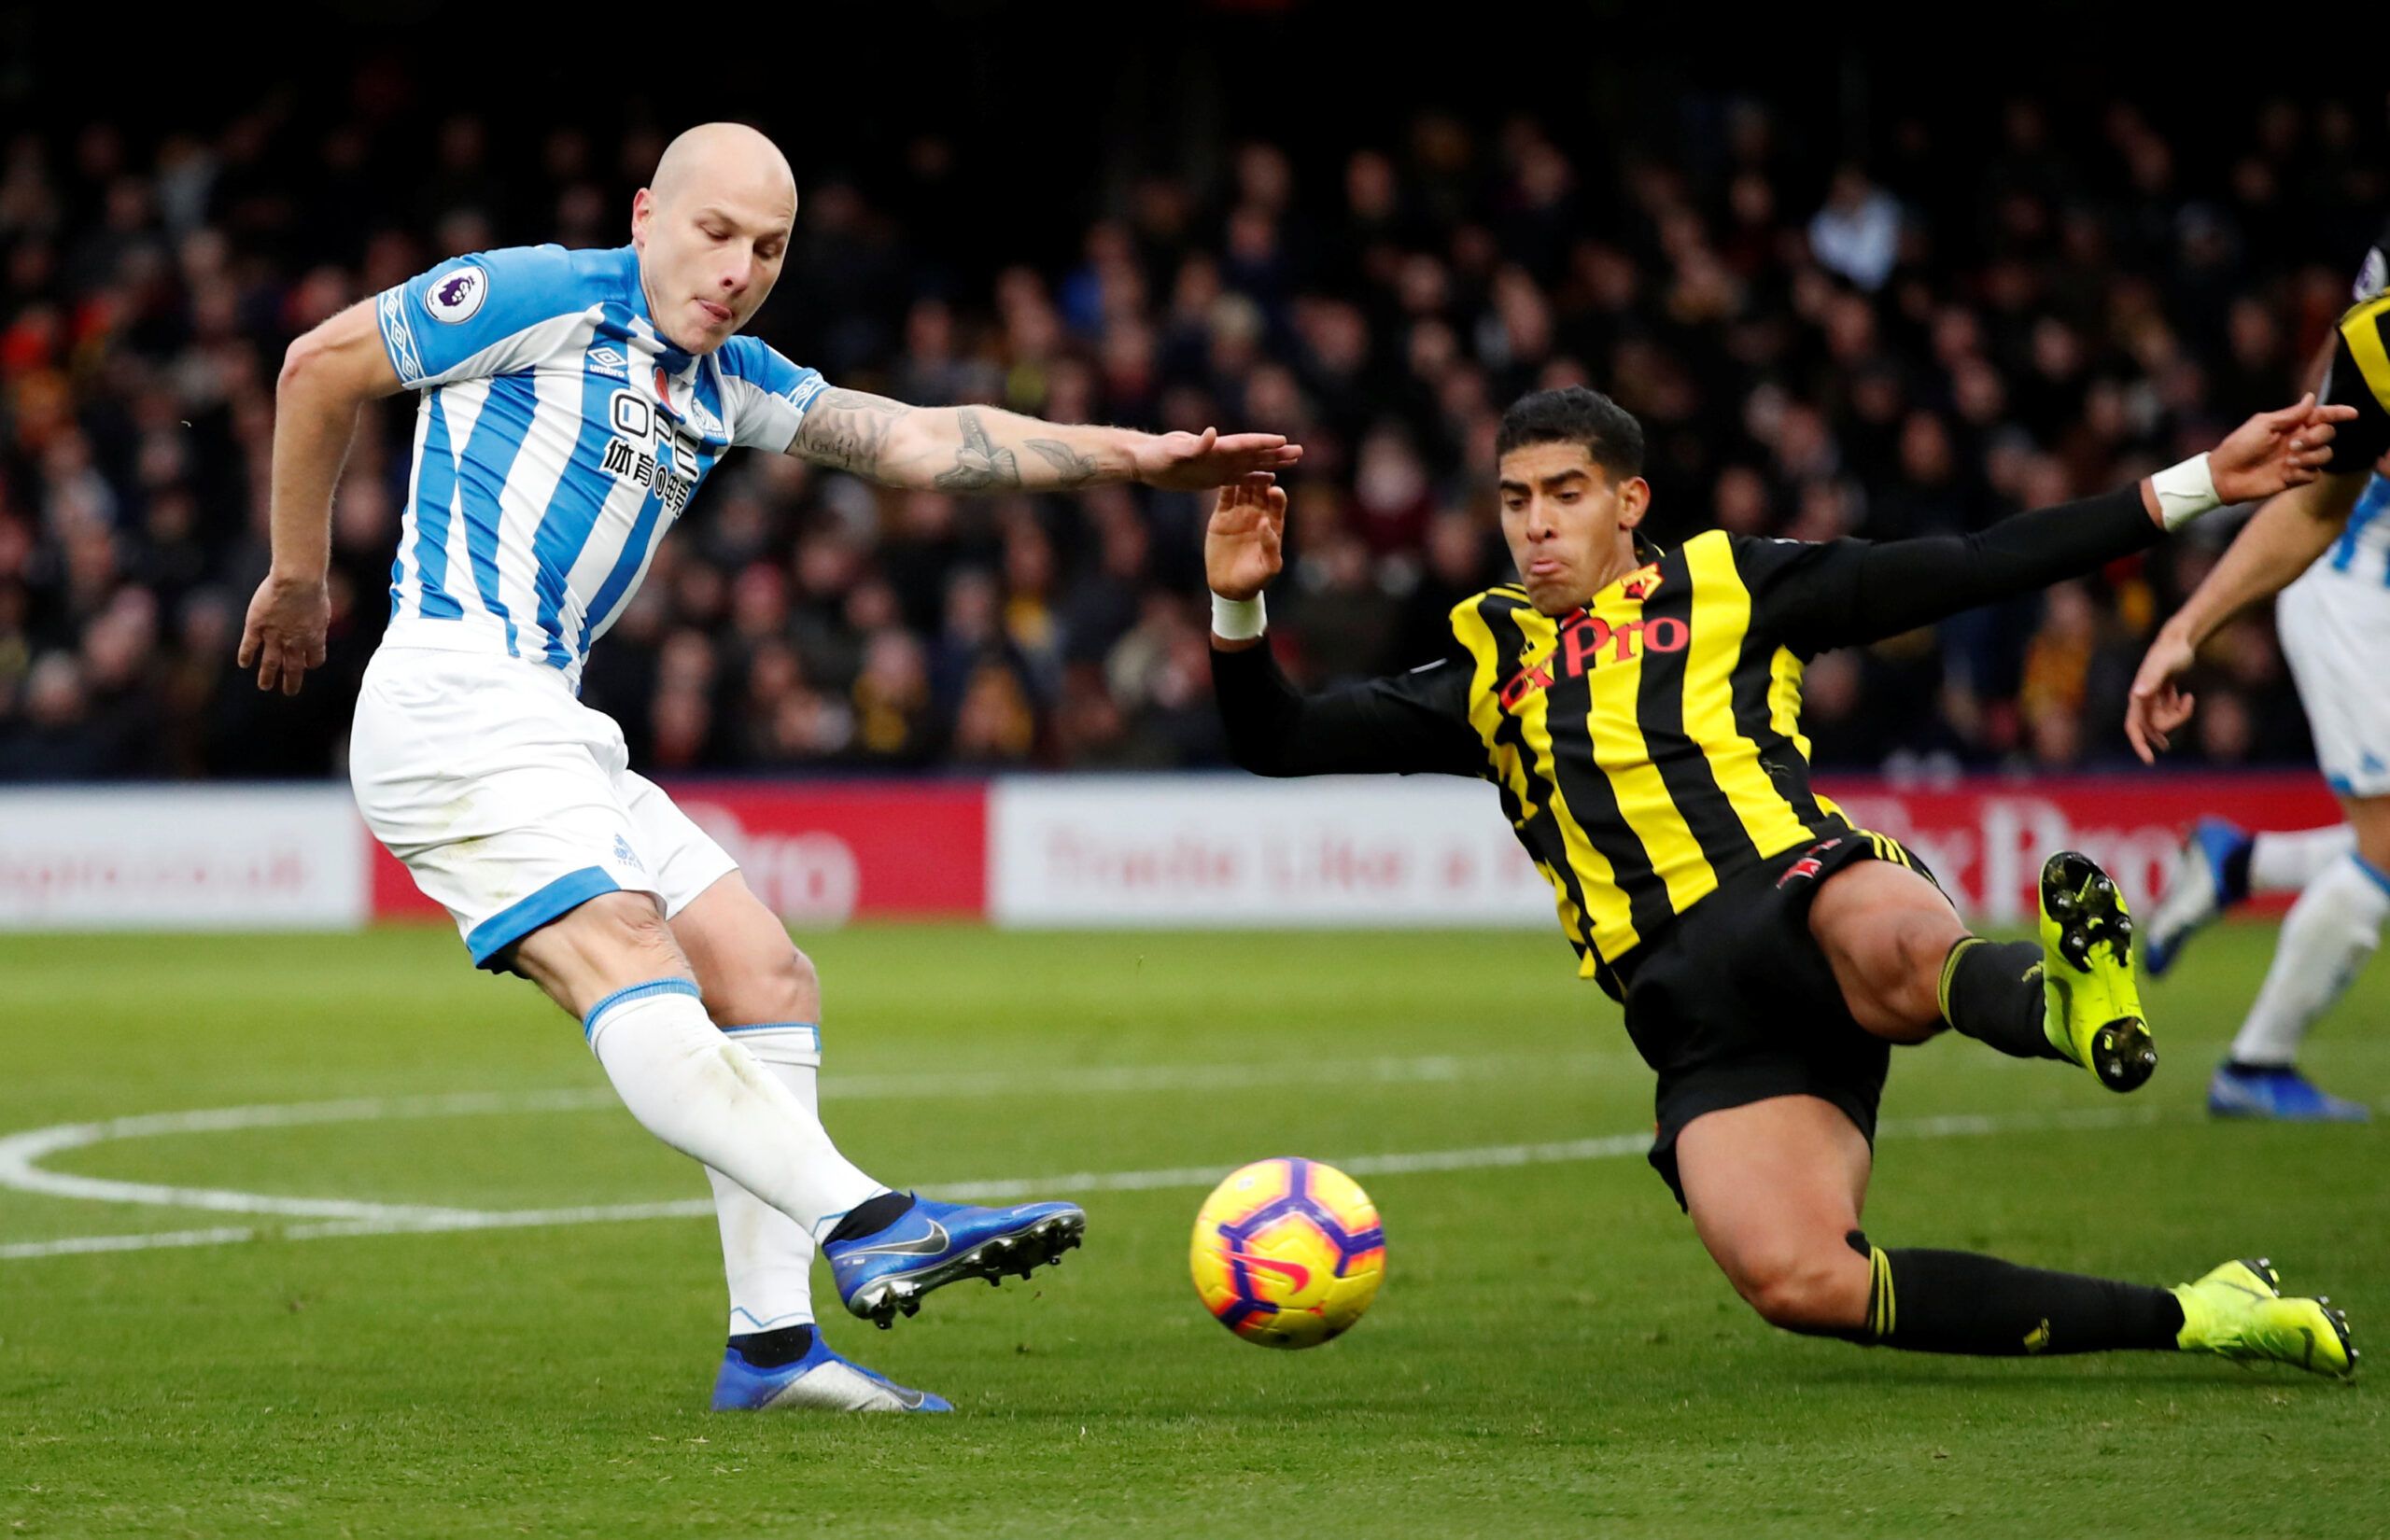 Soccer Football - Premier League - Watford v Huddersfield Town - Vicarage Road, Watford, Britain - October 27, 2018  Huddersfield Town's Aaron Mooy in action with Watford's Adam Masina        Action Images via Reuters/Andrew Boyers  EDITORIAL USE ONLY. No use with unauthorized audio, video, data, fixture lists, club/league logos or 